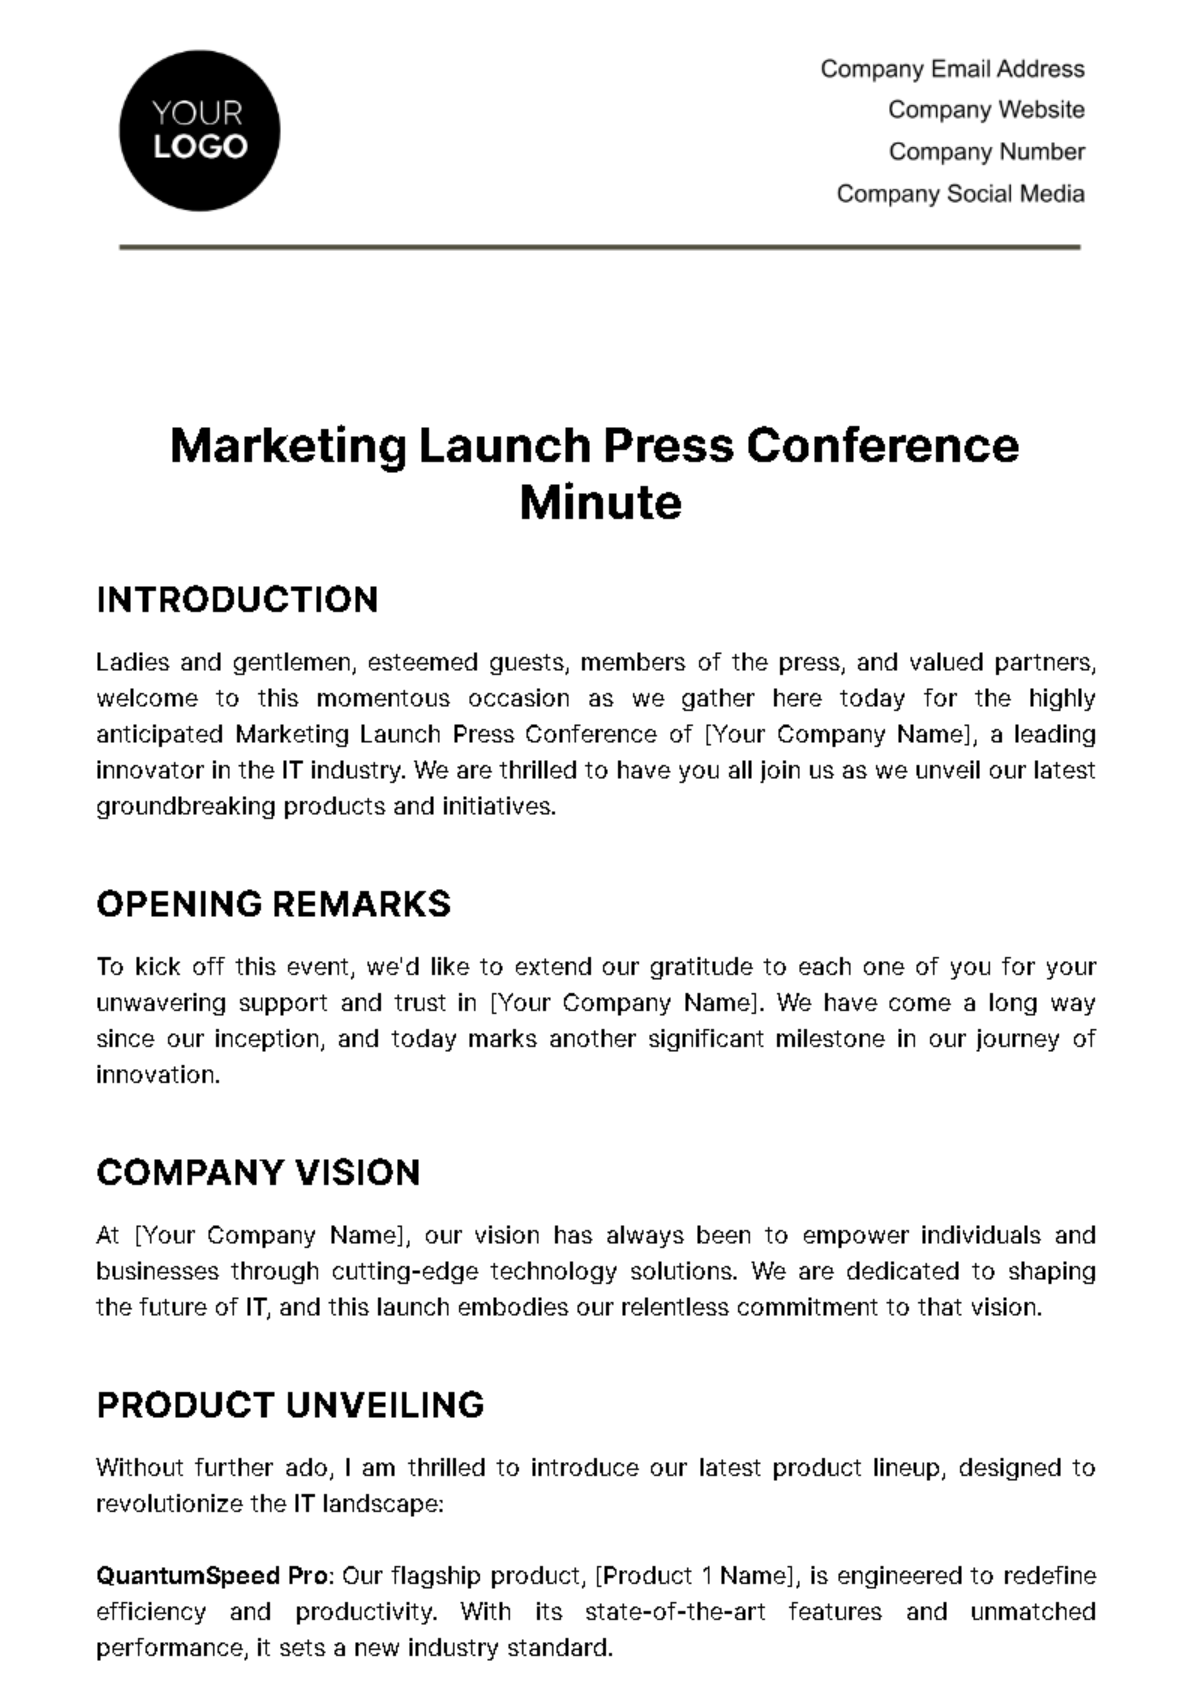 Free Marketing Launch Press Conference Minute Template